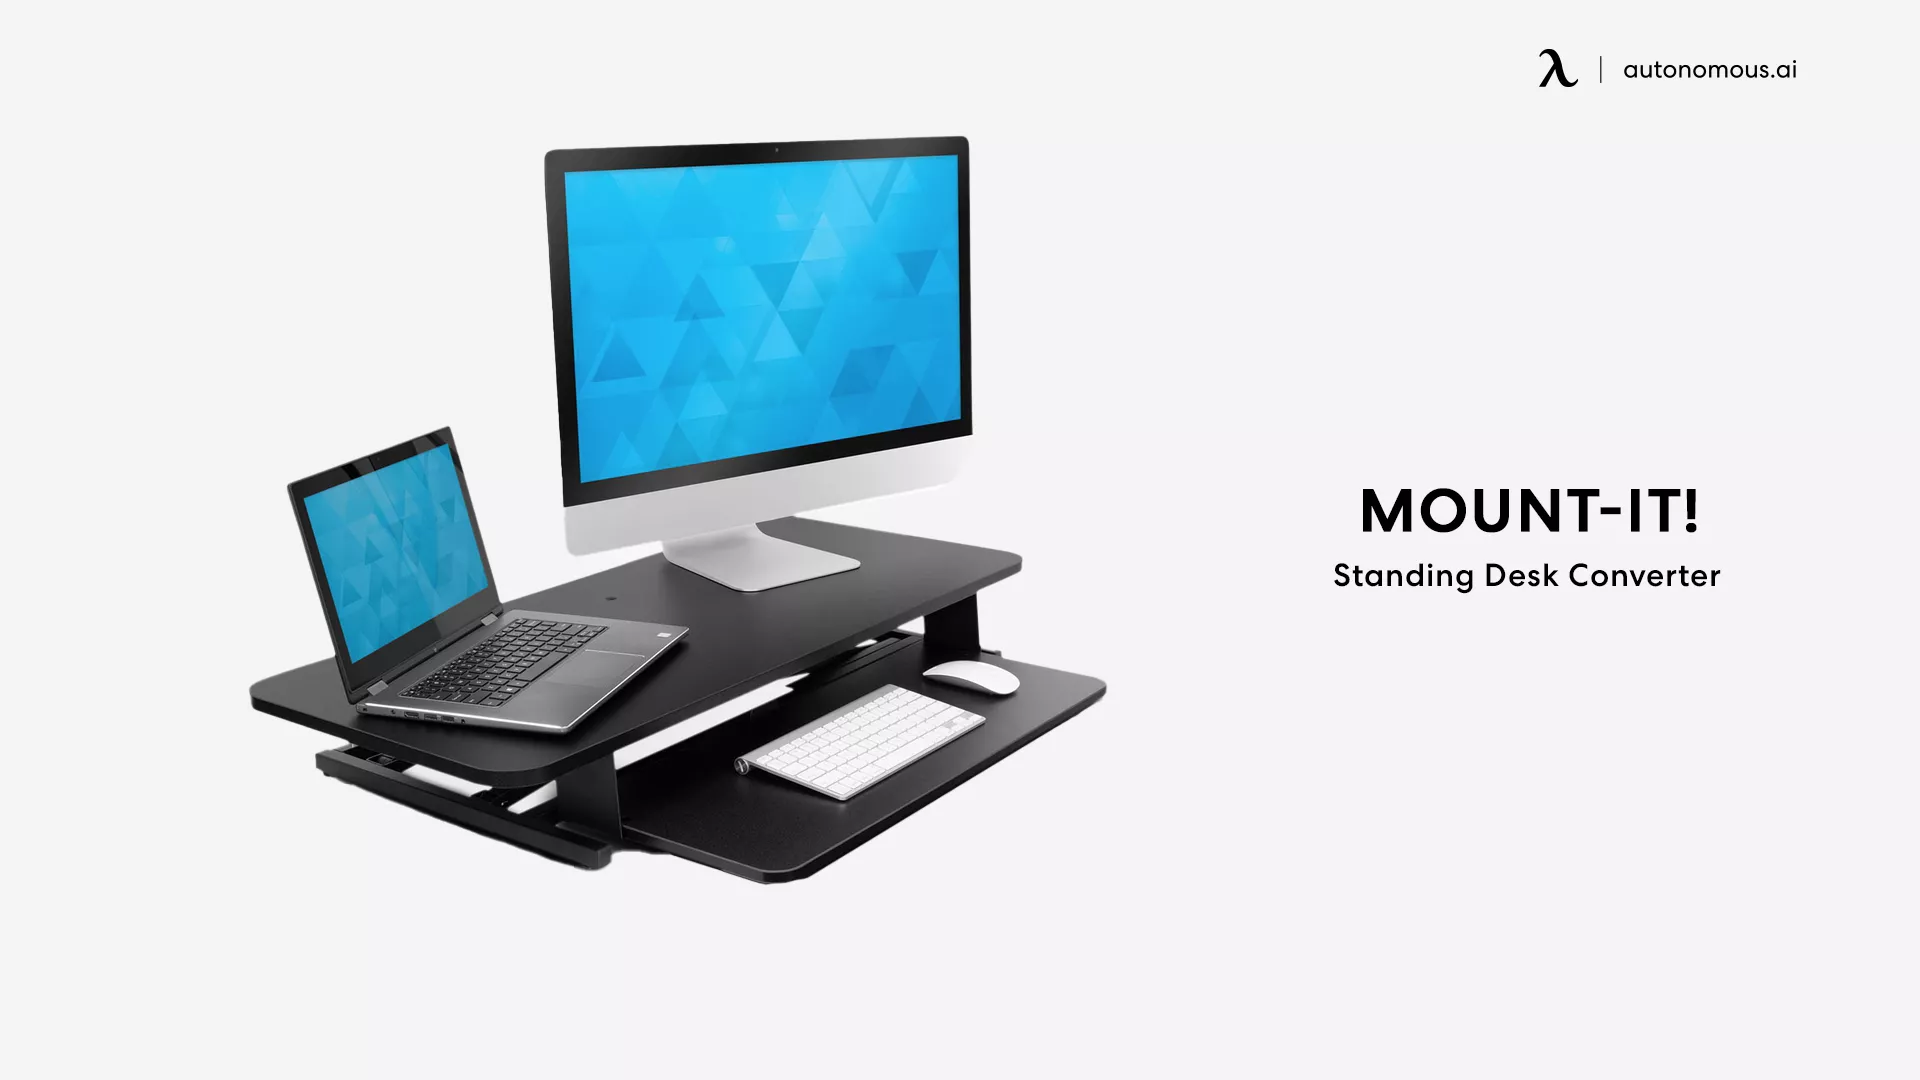 sit stand desk converter by Mount-It!